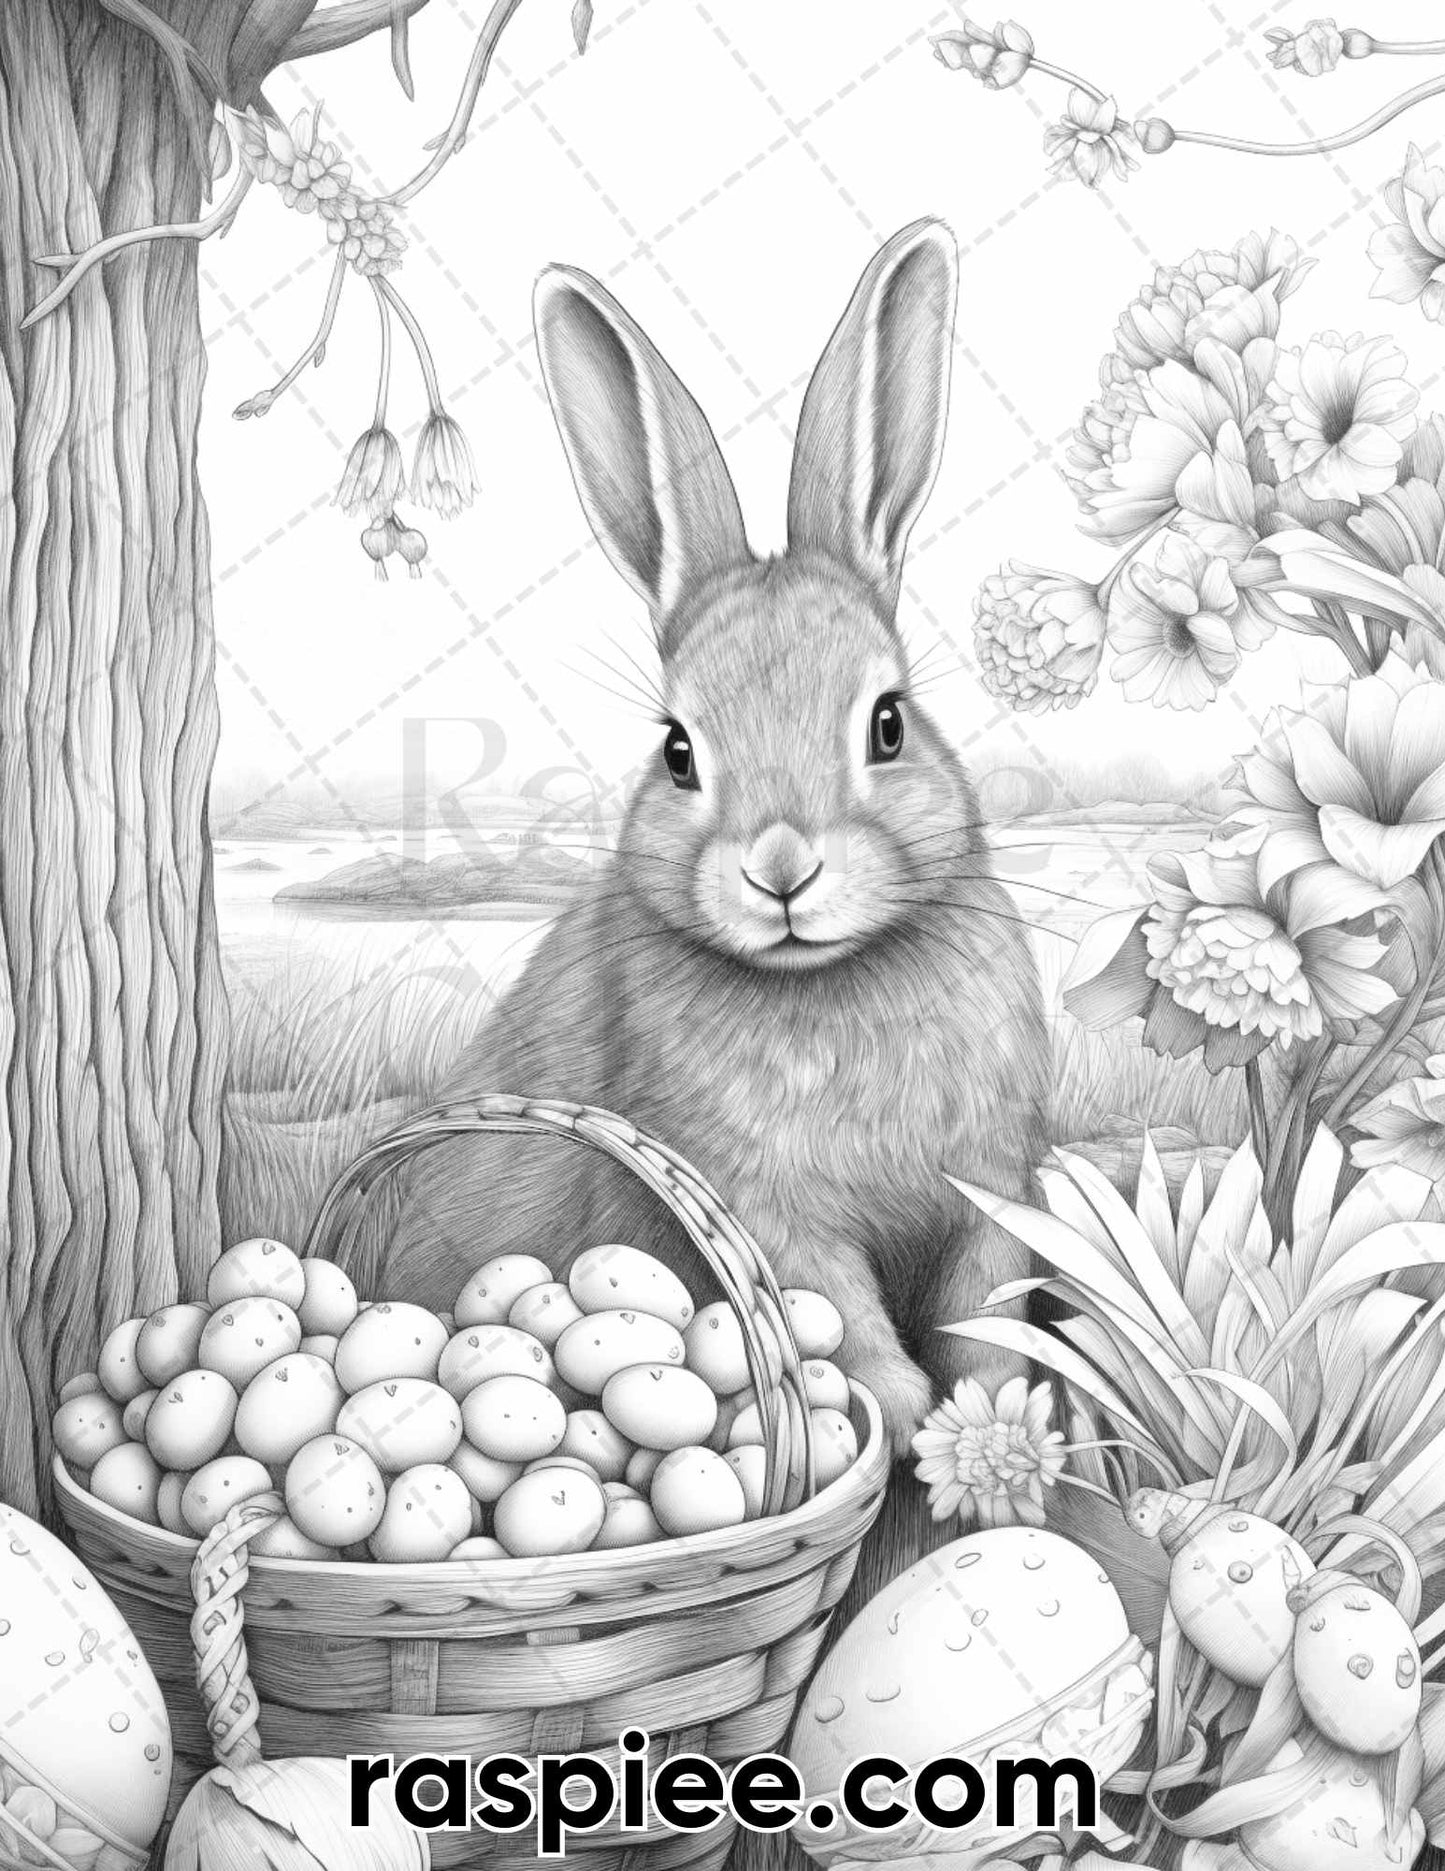 adult coloring pages, adult coloring sheets, adult coloring book pdf, adult coloring book printable, grayscale coloring pages, grayscale coloring books, spring coloring pages for adults, spring coloring book, holiday coloring pages for adults, easter coloring pages for adults, easter coloring book, easter bunny coloring pages